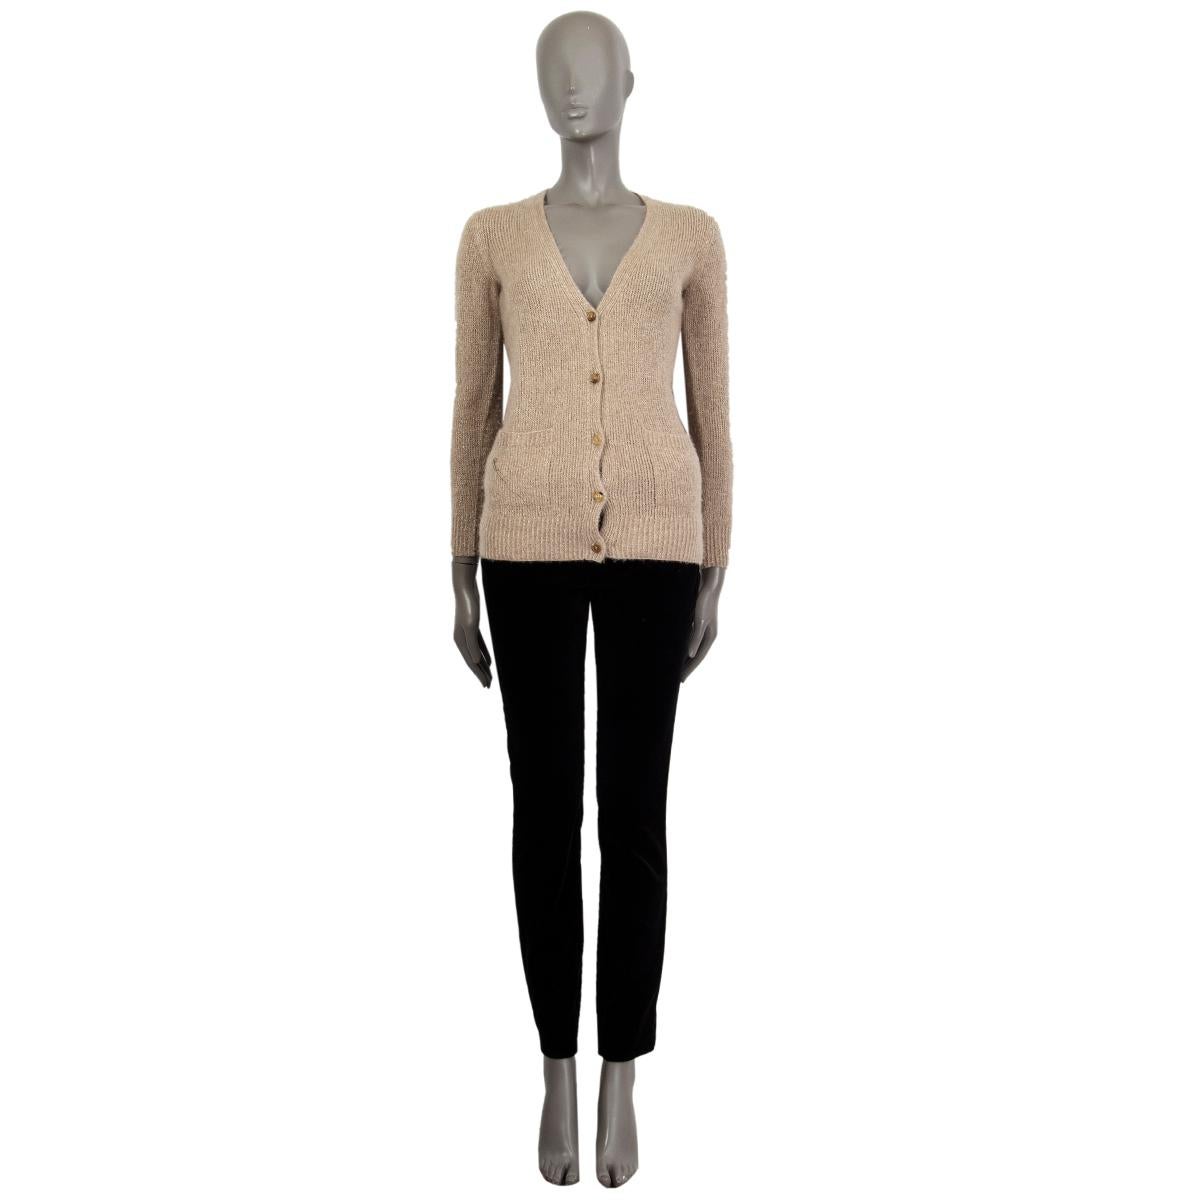 100% authentic Ralph Lauren classic hand knit cardigan in beige cashmere (87%) and silk (13%) with a V-neck, two pockets in the front and ribbed cuffs and hem. Closes with a button fastening in the front. Has been worn and is in excellent condition.